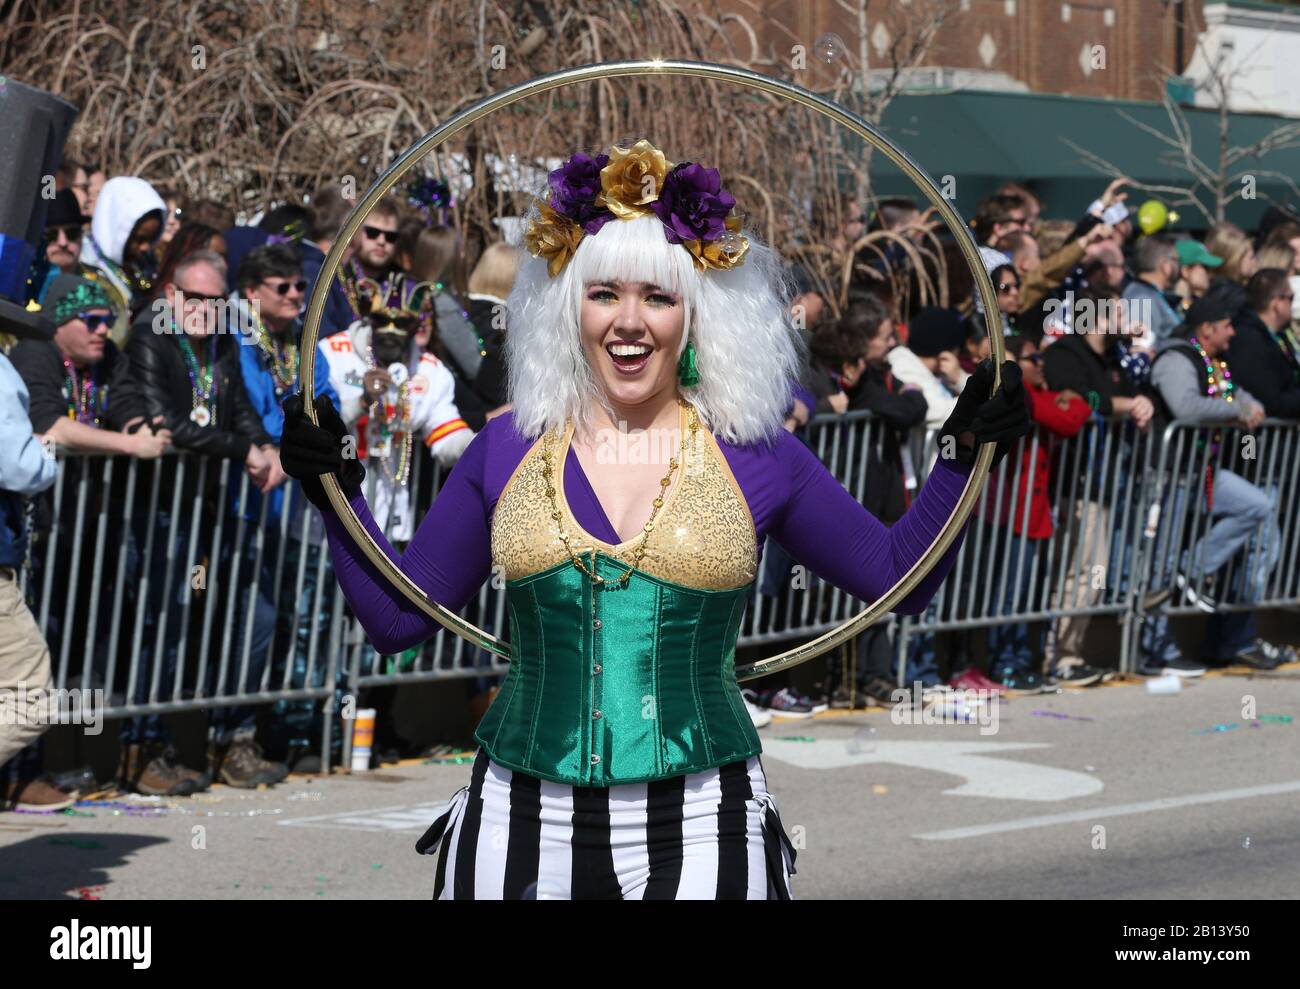 St. Louis, United States. 22nd Feb, 2020. A woman performs with a hula hoop as she walks in the St. Louis Mardi Gras Parade in St. Louis on Saturday, February 22, 2020. Photo by Bill Greenblatt/UPI Credit: UPI/Alamy Live News Stock Photo